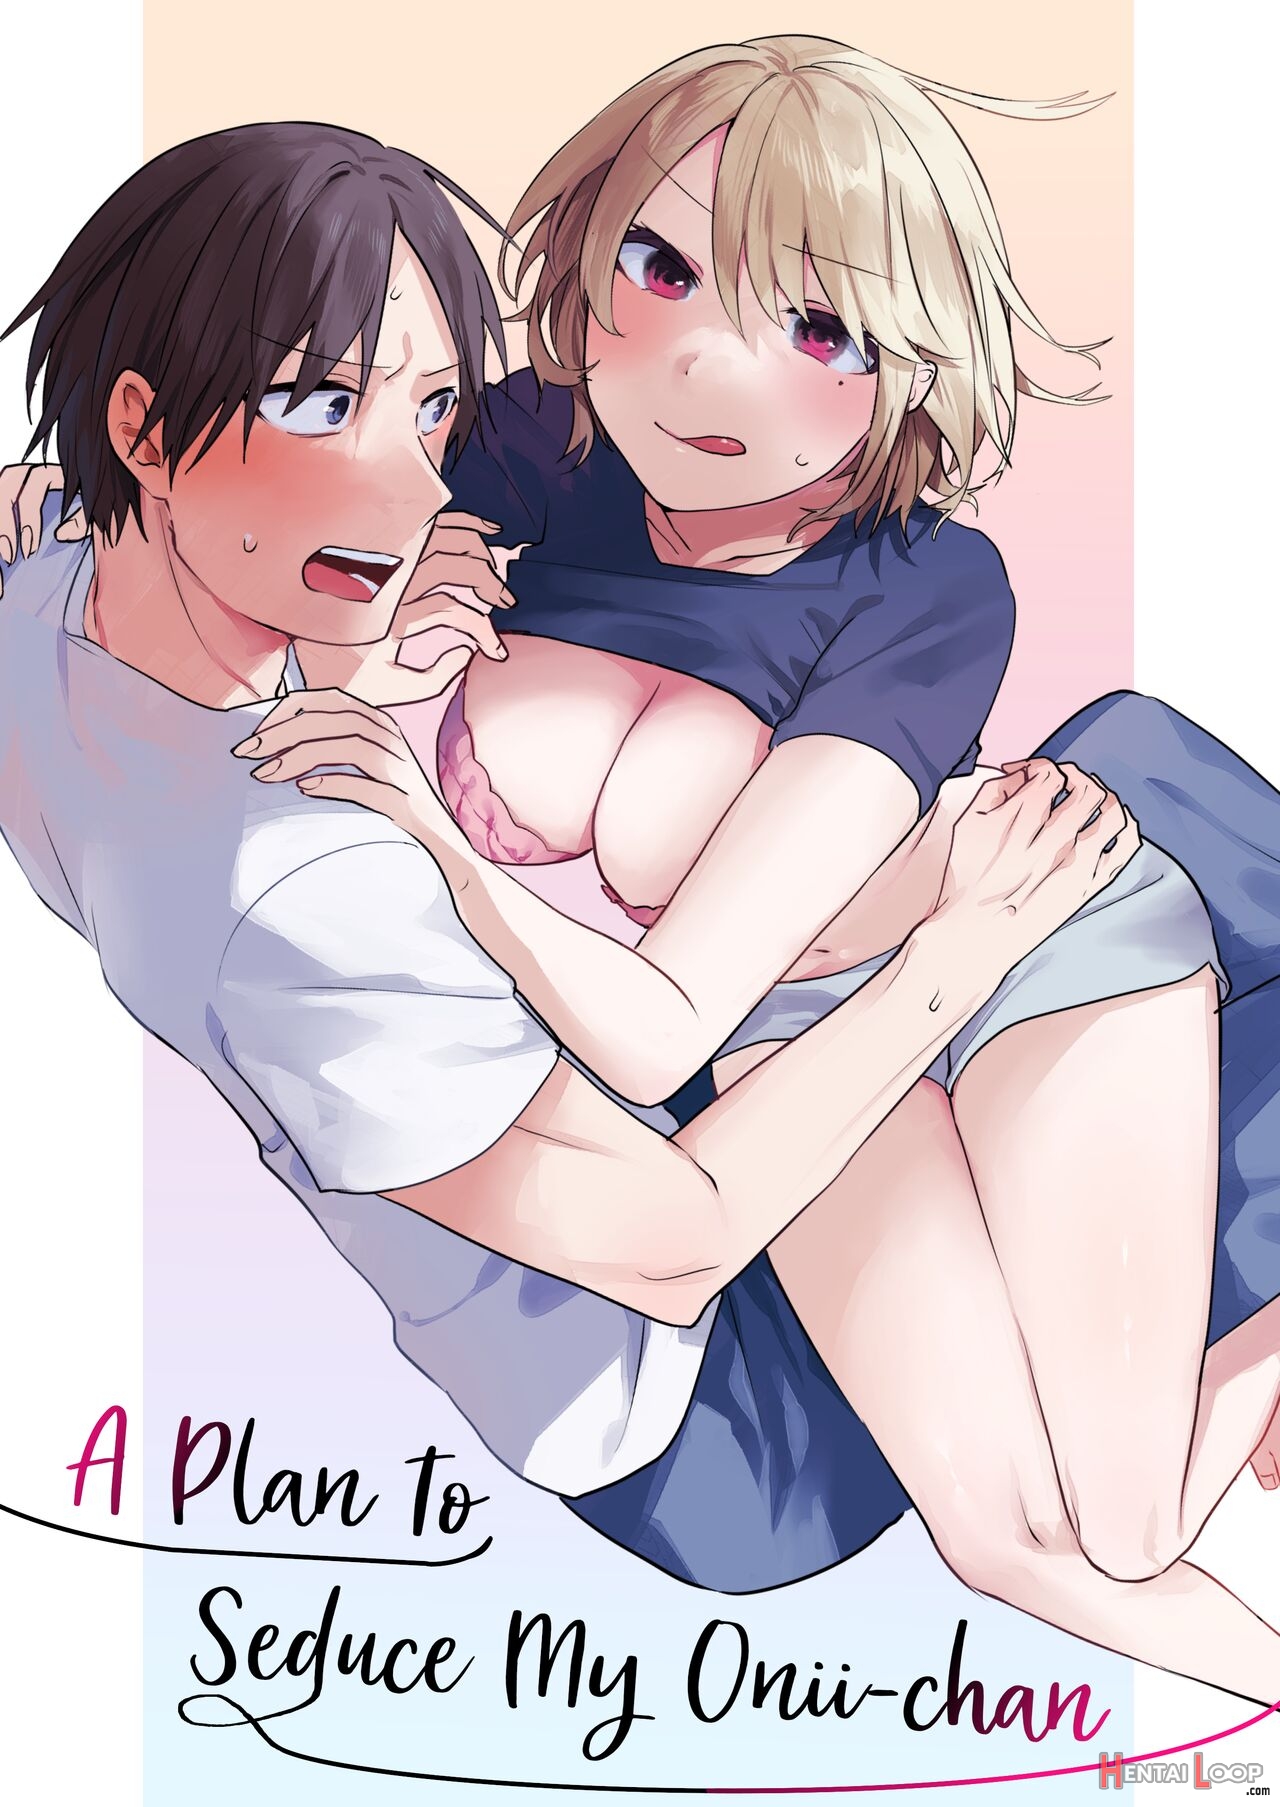 A Plan To Seduce My Onii-chan page 1